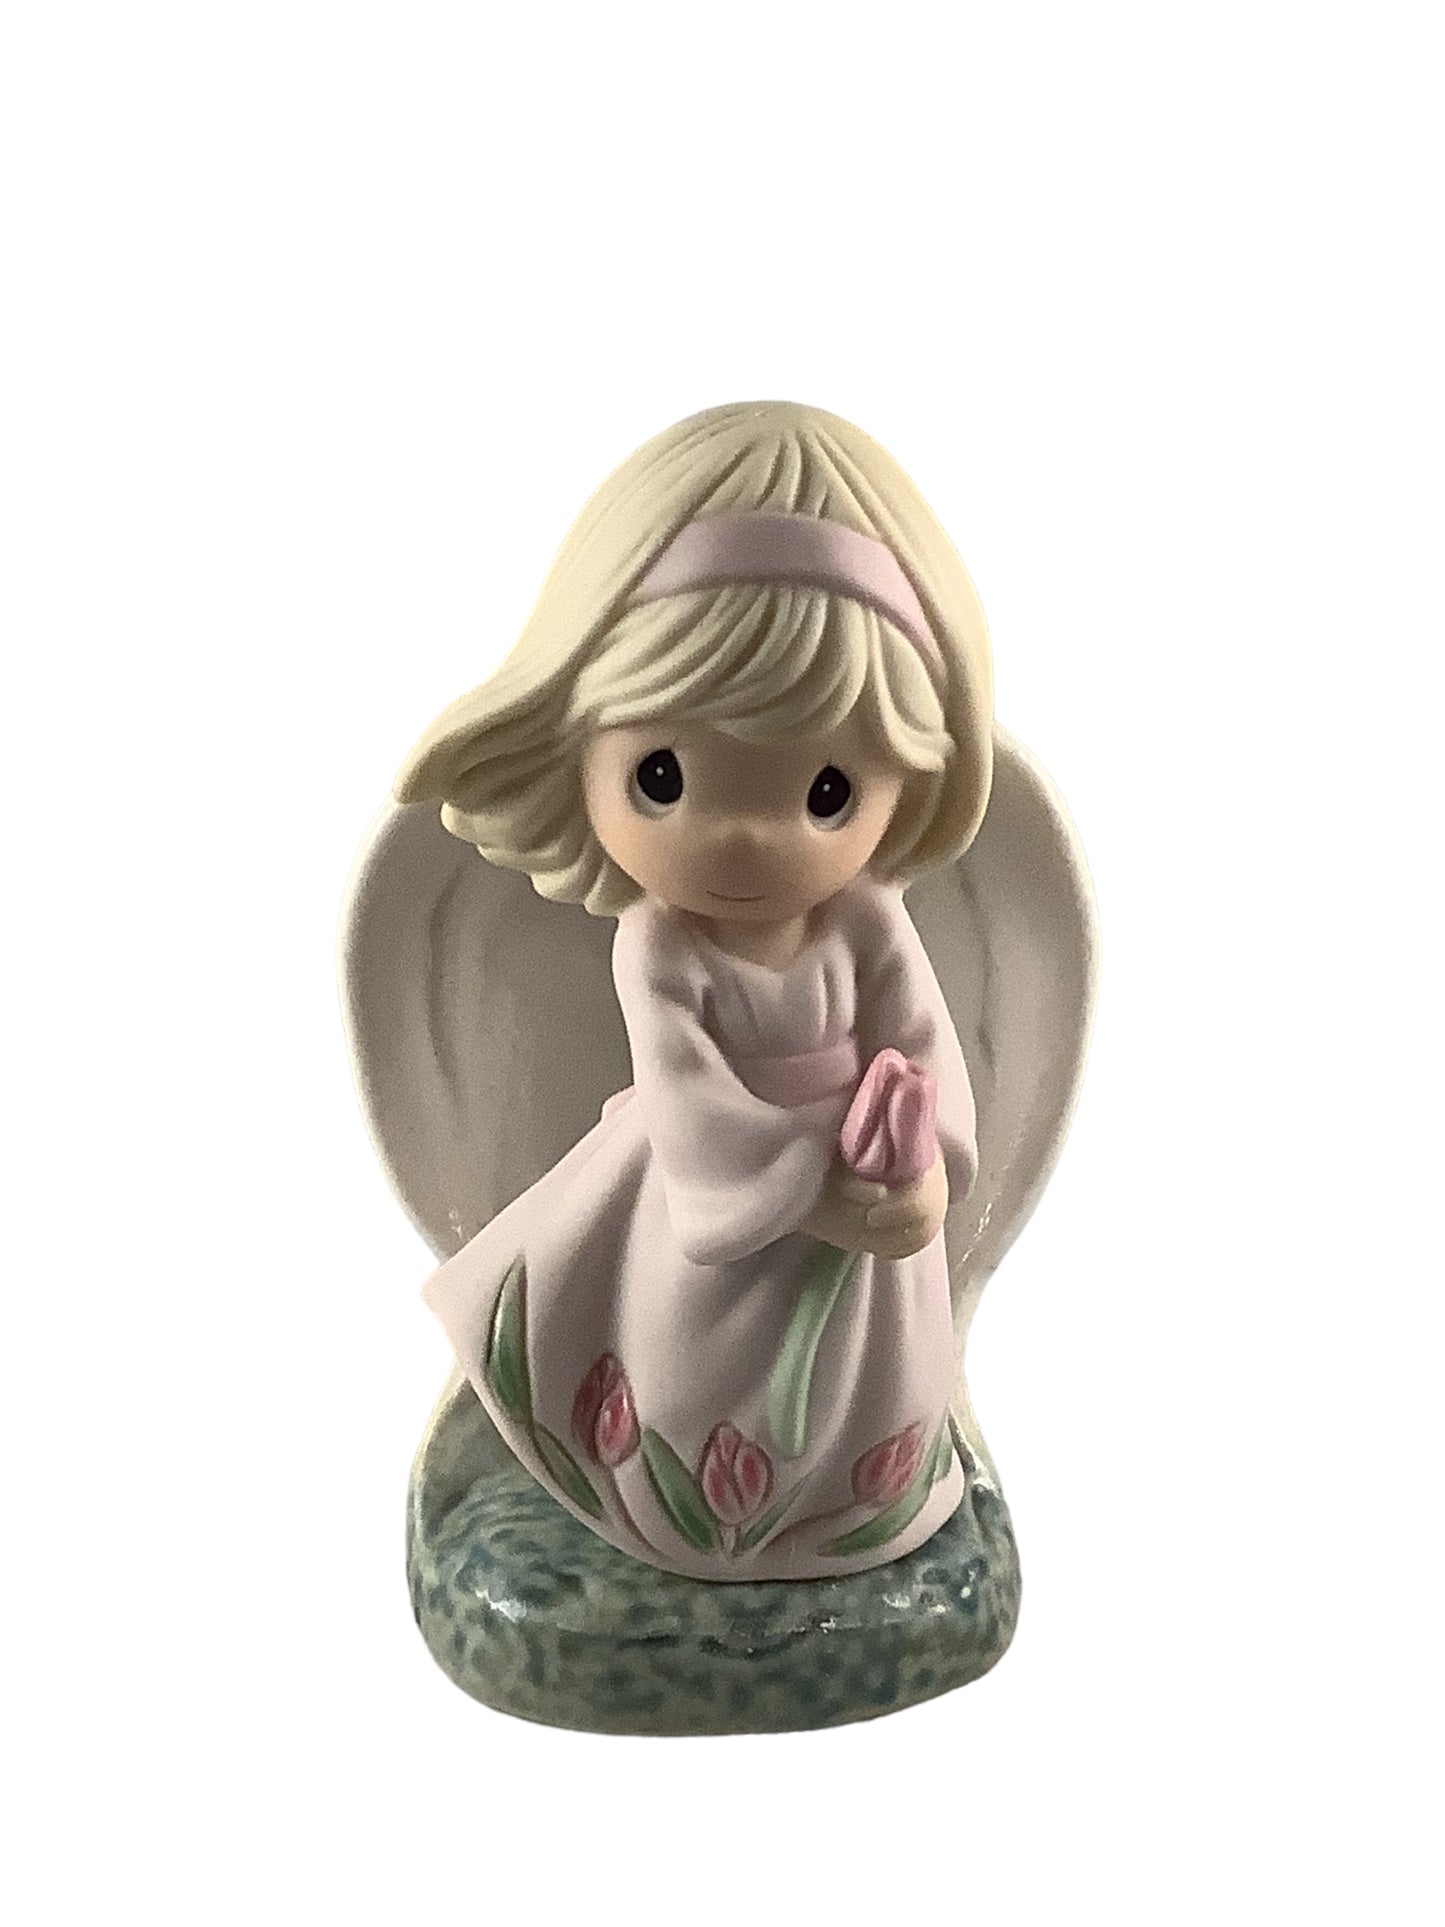 Your Everyday Kindness Is My Everyday Joy - Precious Moment Figurine